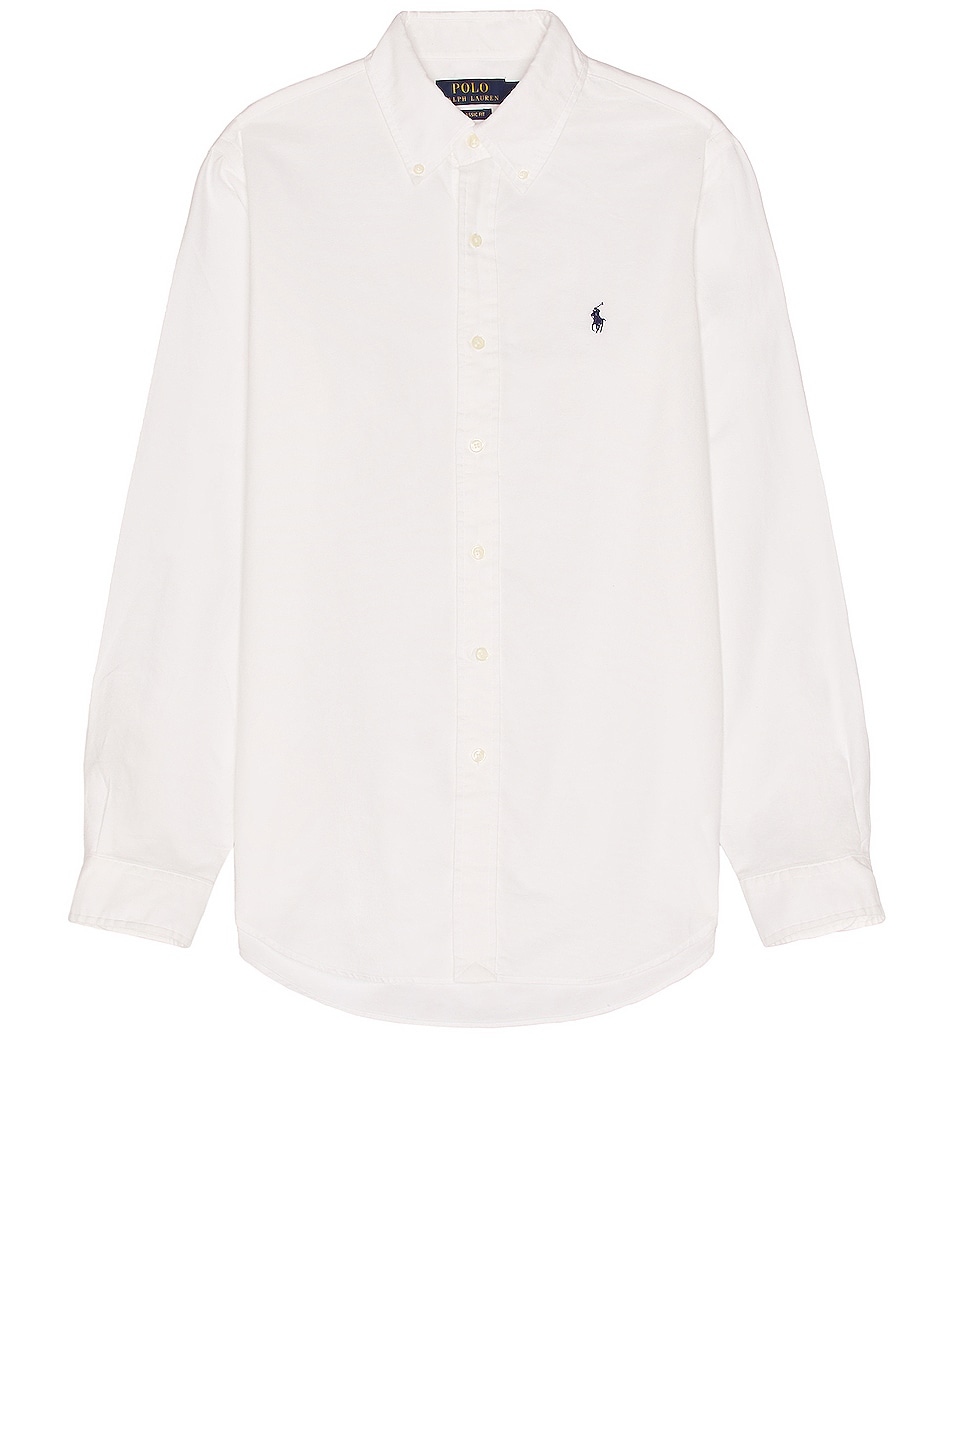 Image 1 of Polo Ralph Lauren Garment Dyed Oxford Shirt in White